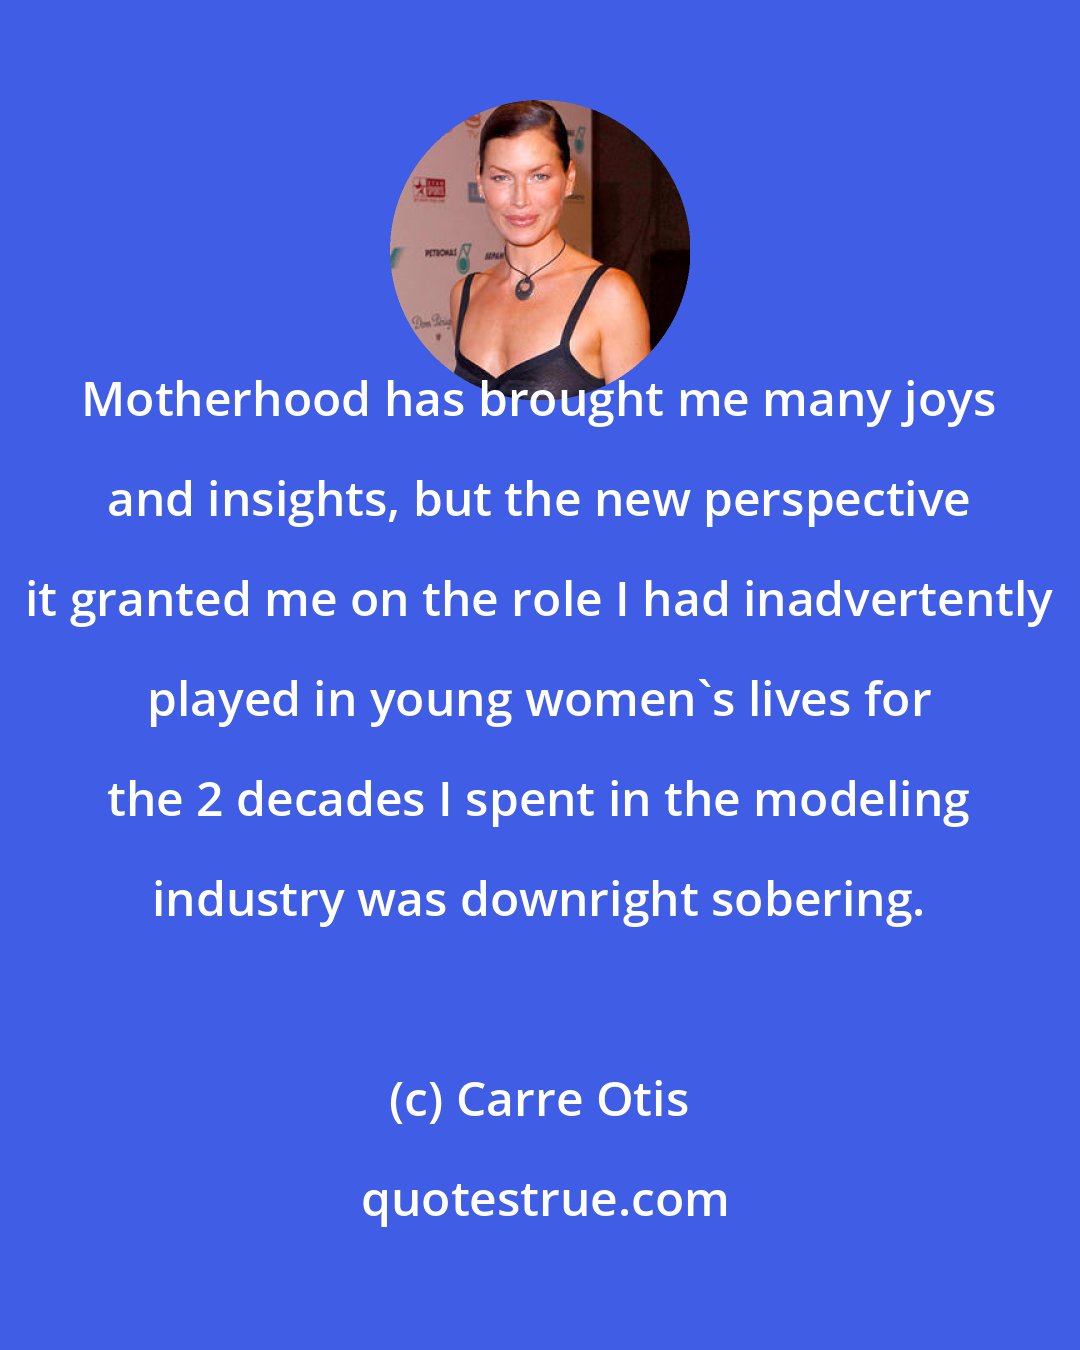 Carre Otis: Motherhood has brought me many joys and insights, but the new perspective it granted me on the role I had inadvertently played in young women's lives for the 2 decades I spent in the modeling industry was downright sobering.